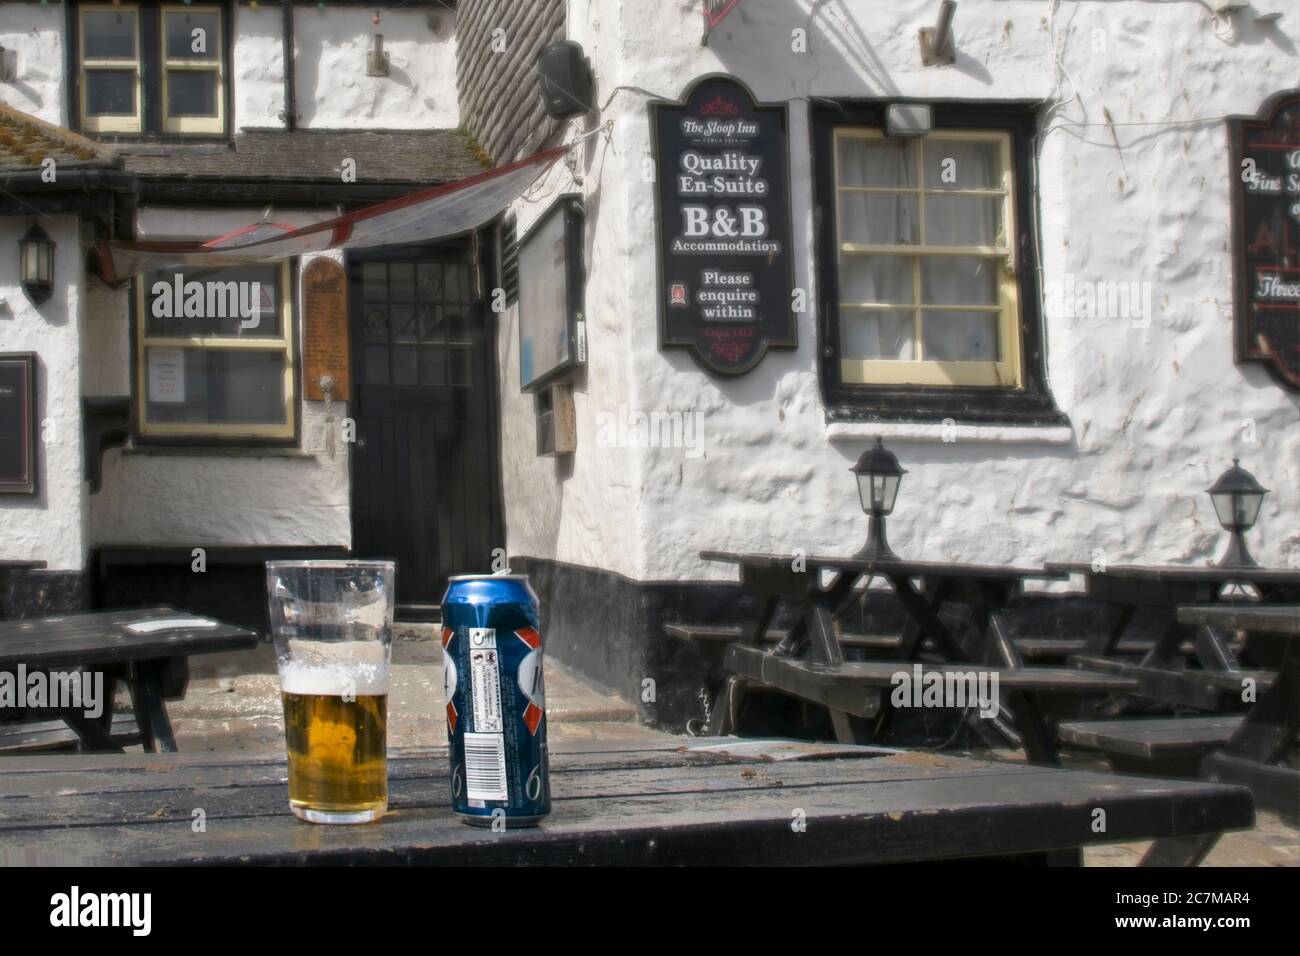 COVID19 March 2020 lockdown Pubs closed outside tables empty Half drunk pint of lager with can on table symbol of abandonment and loss of socialising Stock Photo